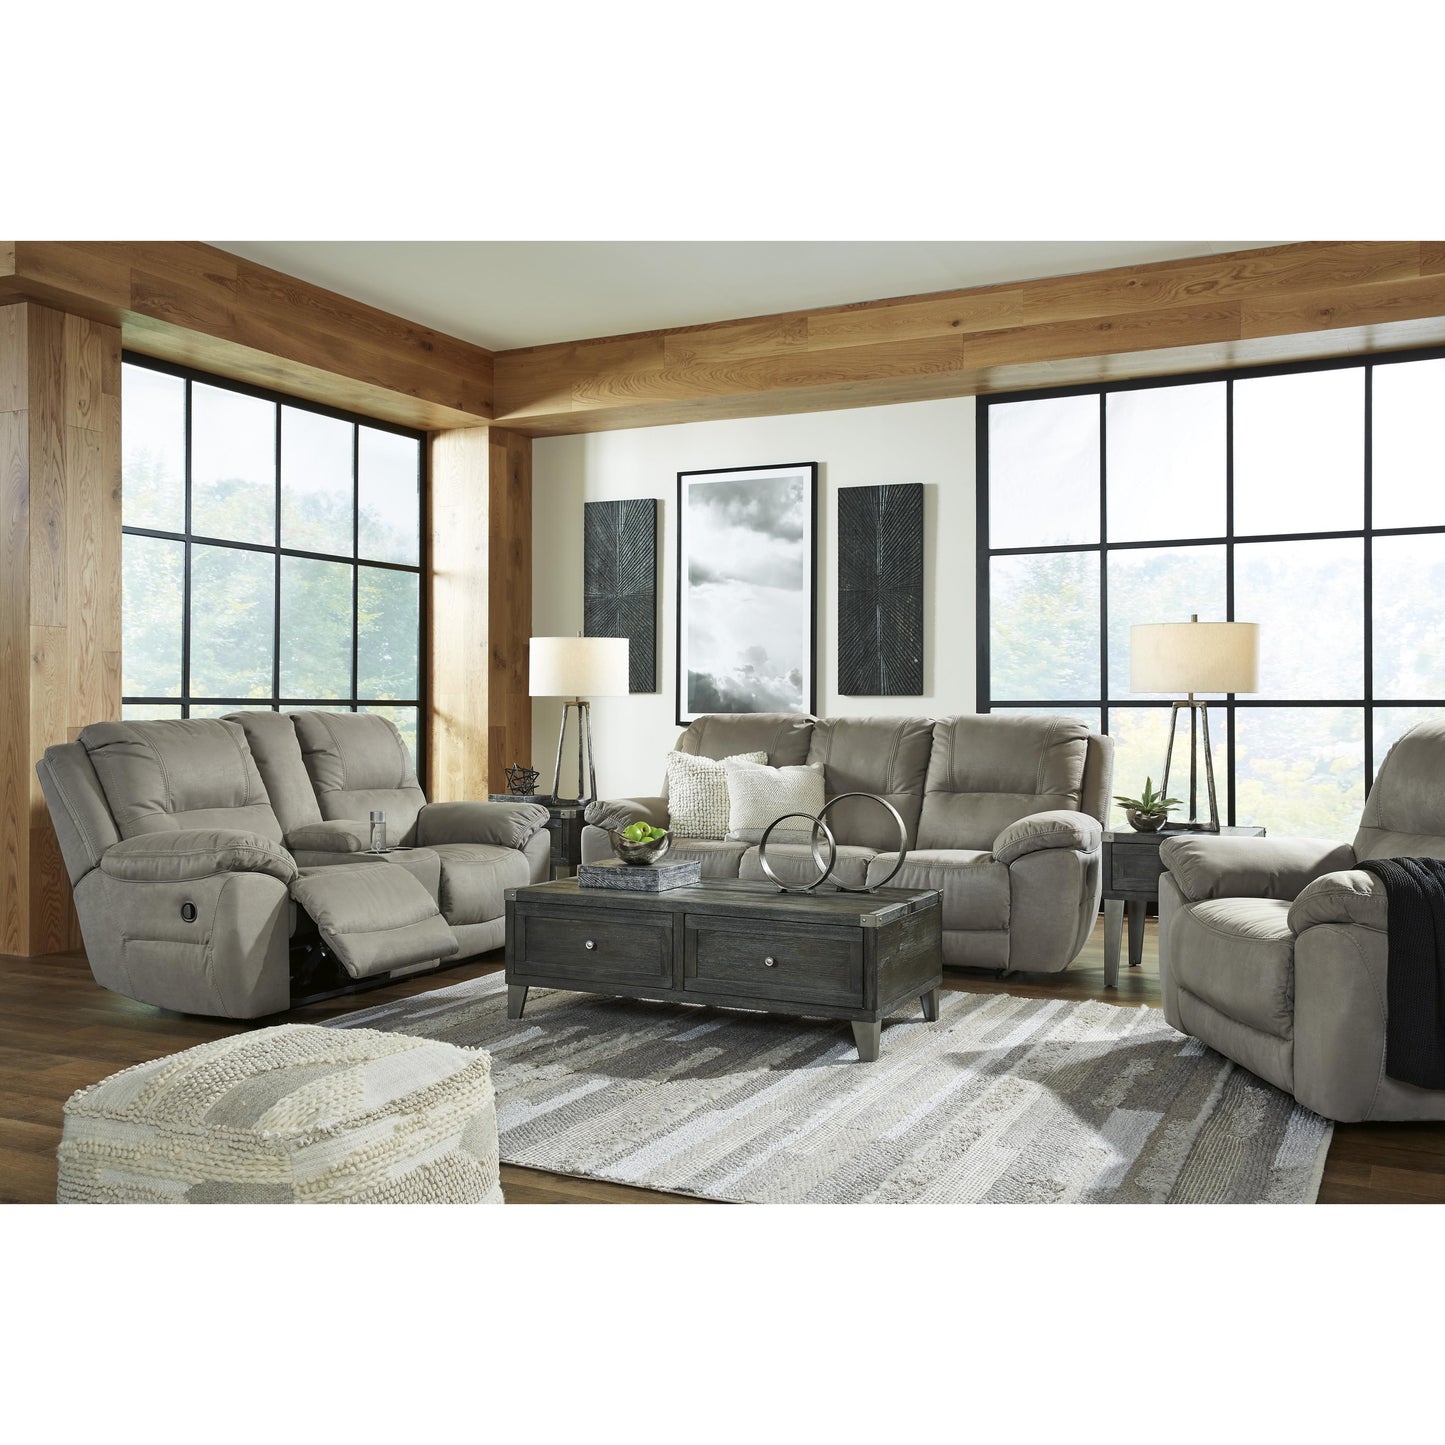 Signature Design by Ashley Next-Gen Gaucho Reclining Leather Look Loveseat 5420394 IMAGE 11